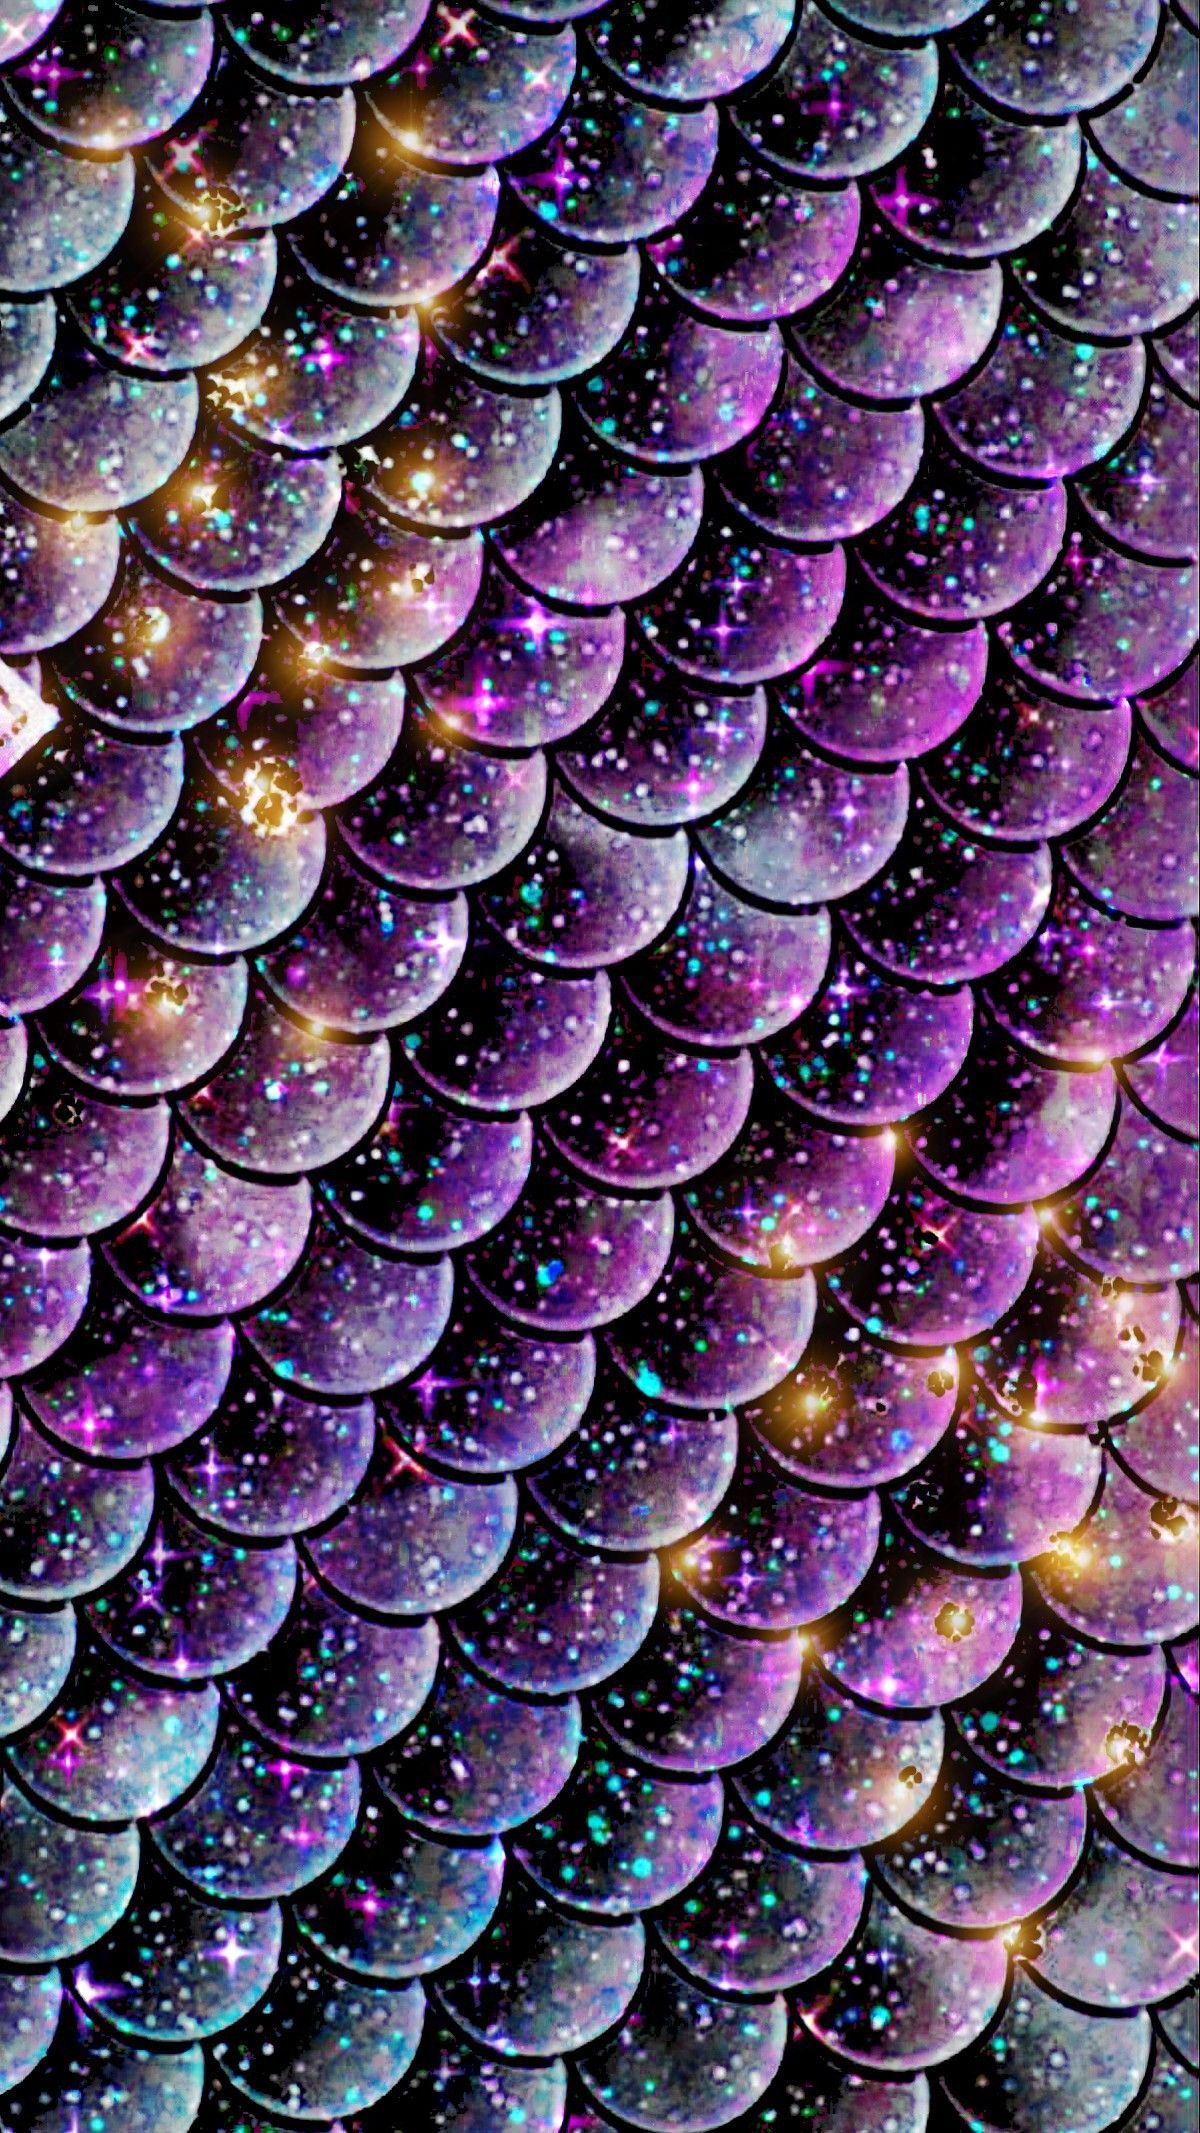 Glittery Mermaid Tail, made by me #purple #sparkly #wallpaper #background #sparkles #glittery #galaxy #m. Mermaid wallpaper, Mermaid background, Mermaid mosaic